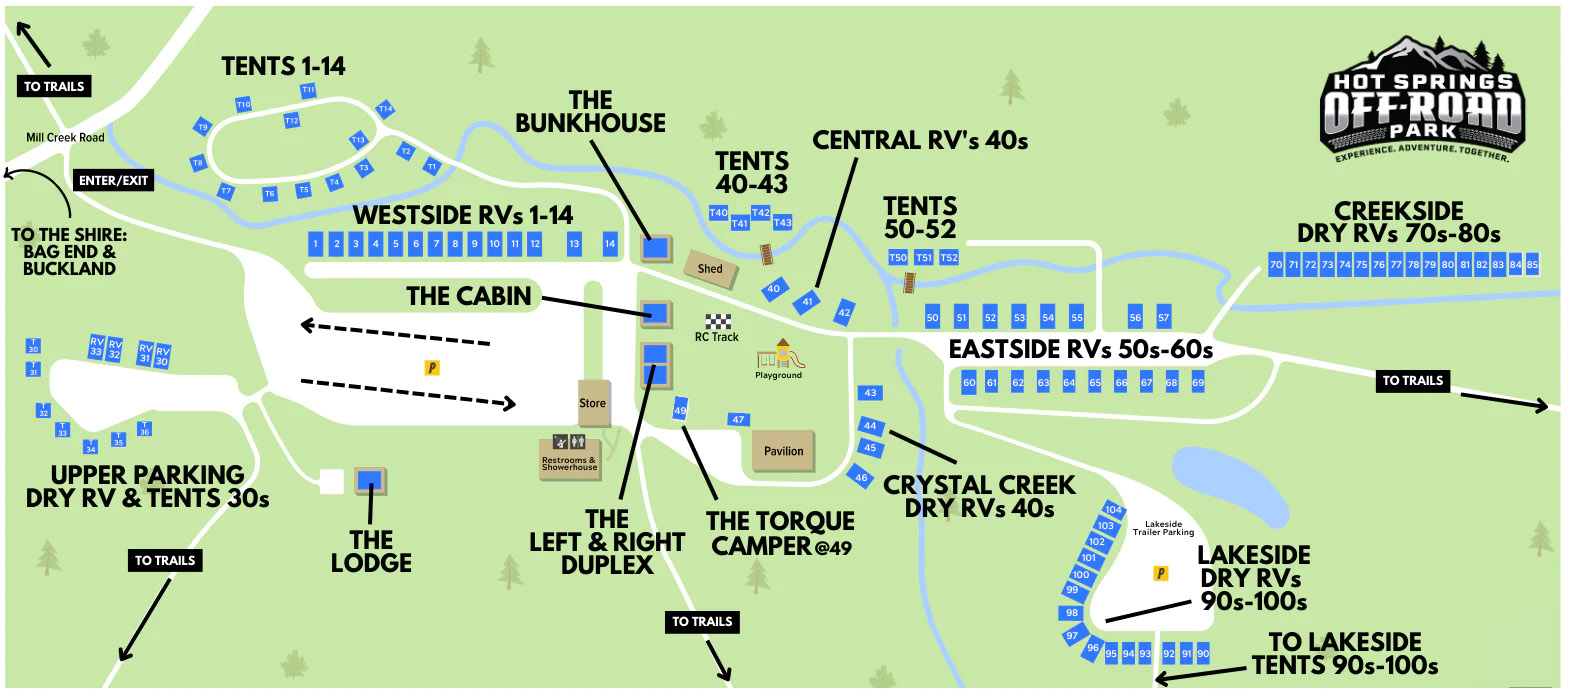 hot springs off-road park map